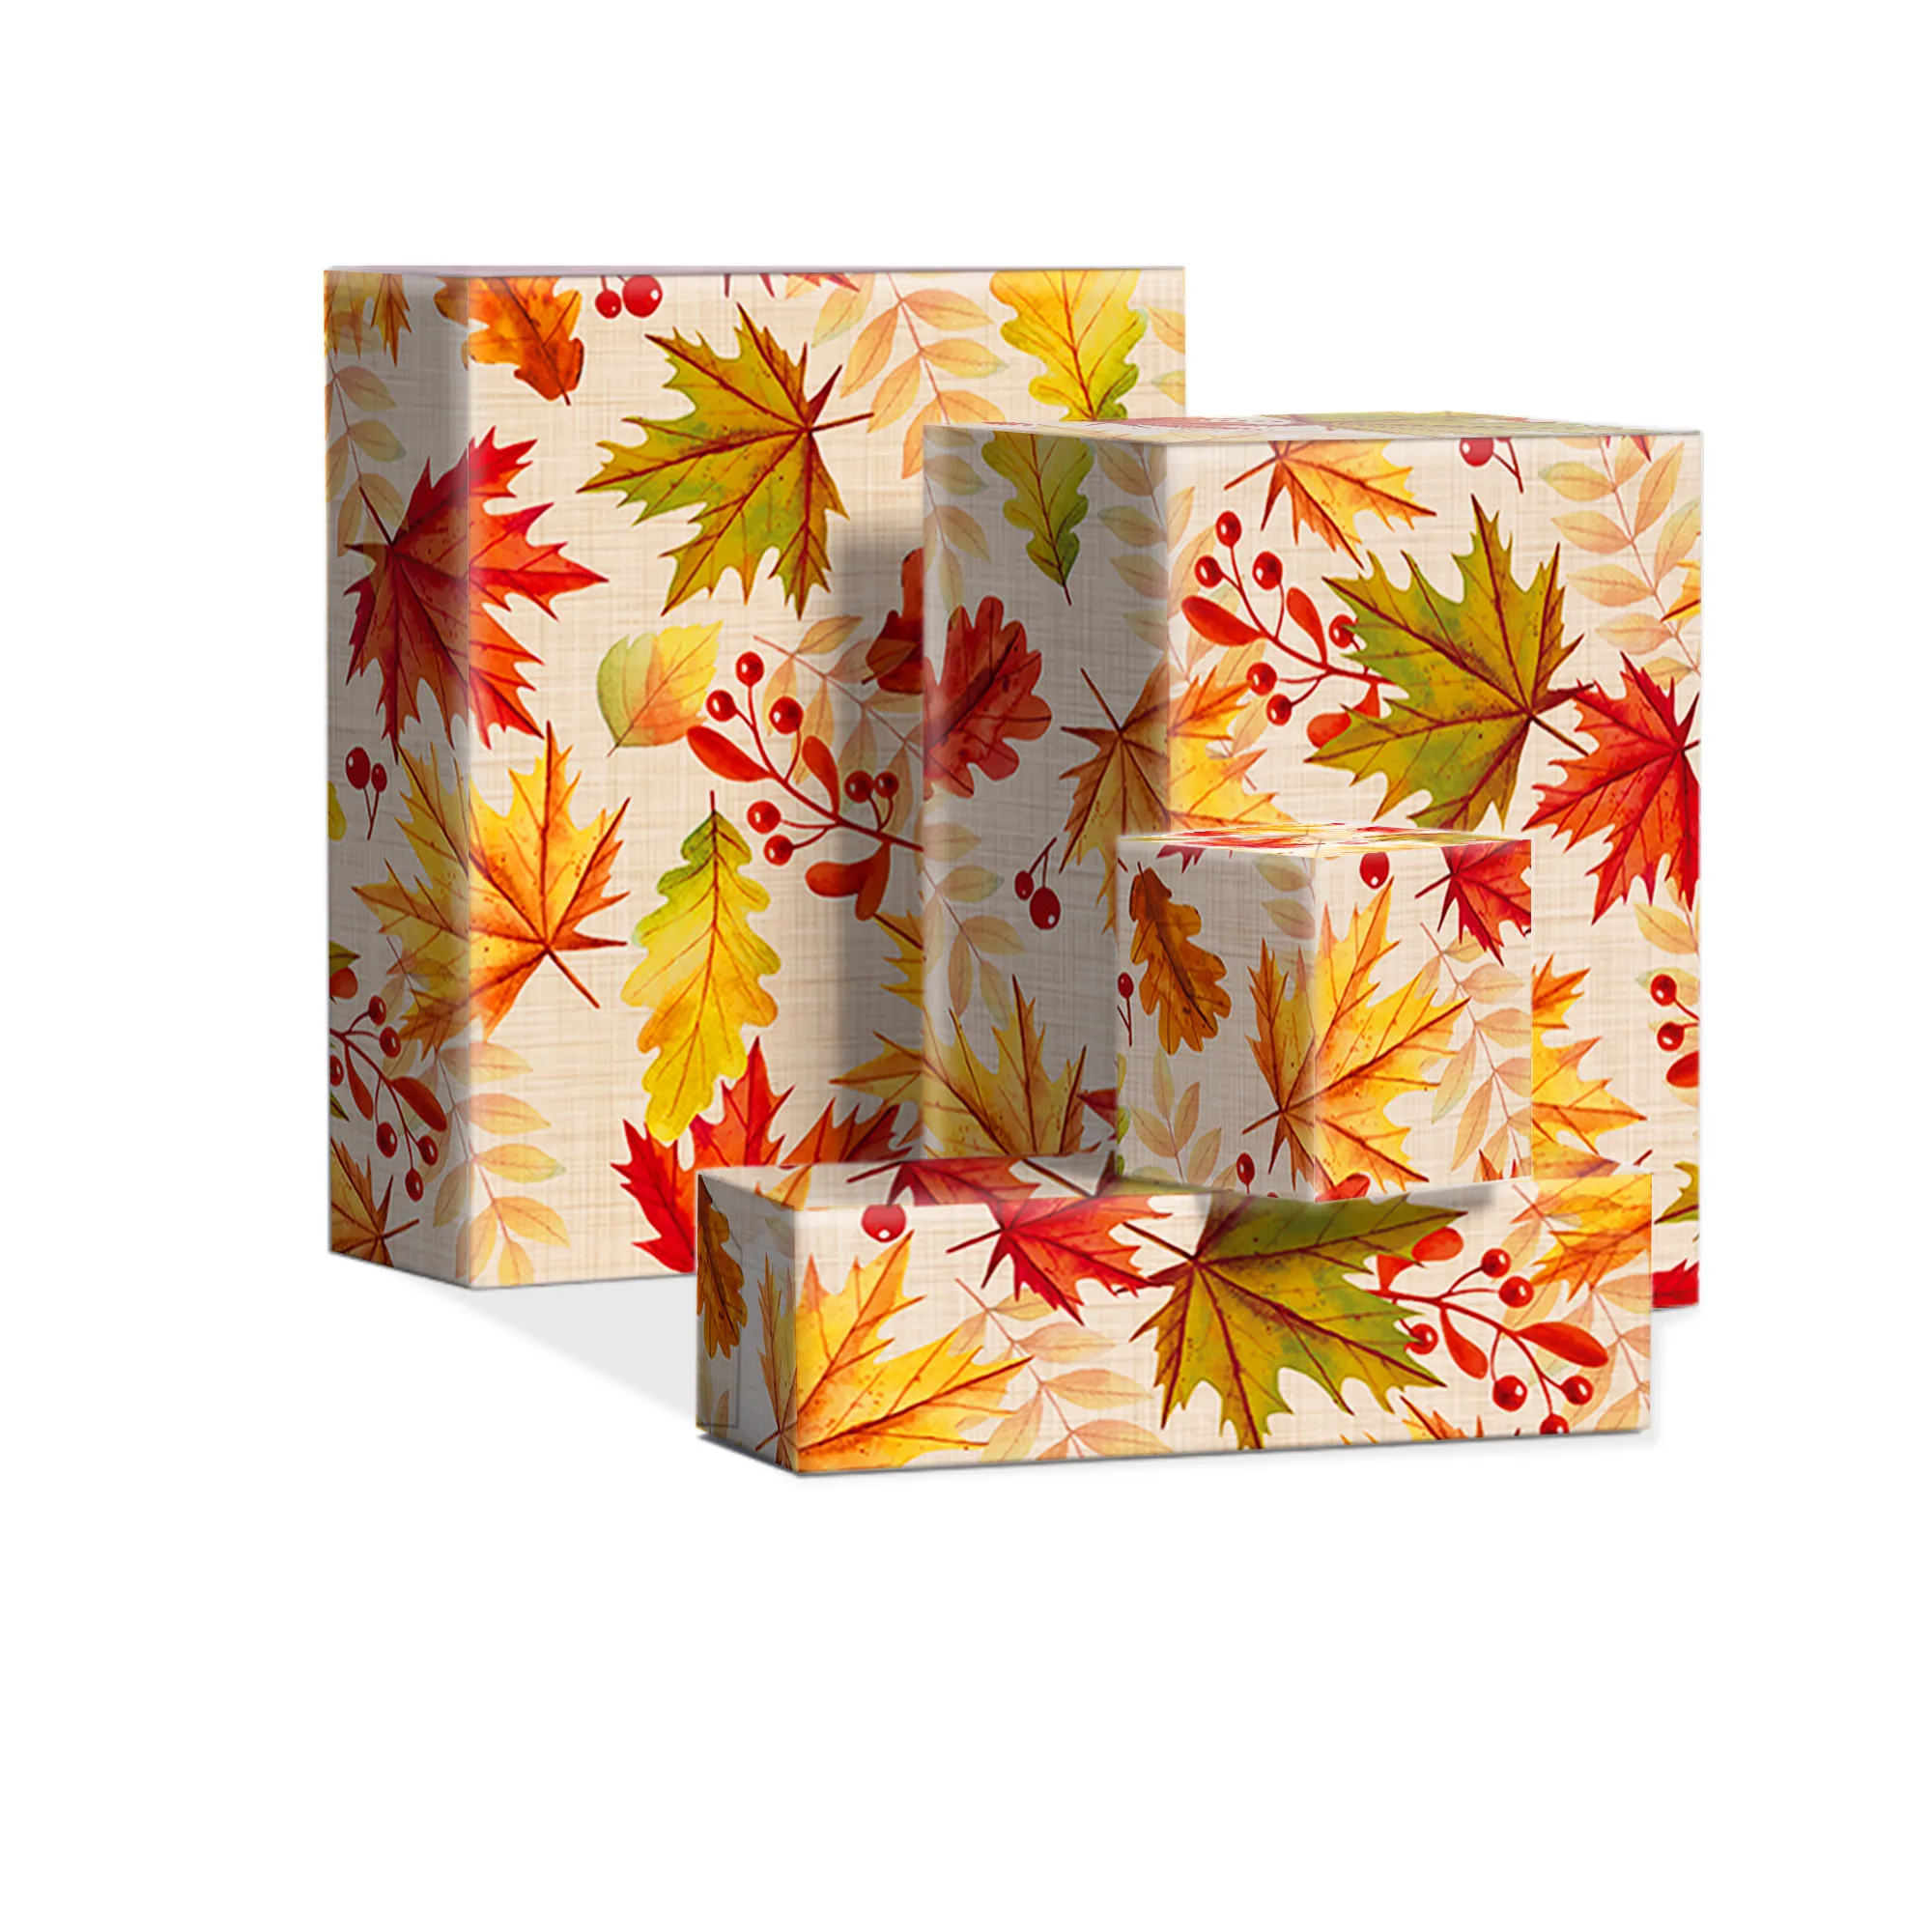 WZ015 Fall Maple Leaves Pattern Decoration Autumn Paper Gift Wrapping Paper for Thanksgiving Day